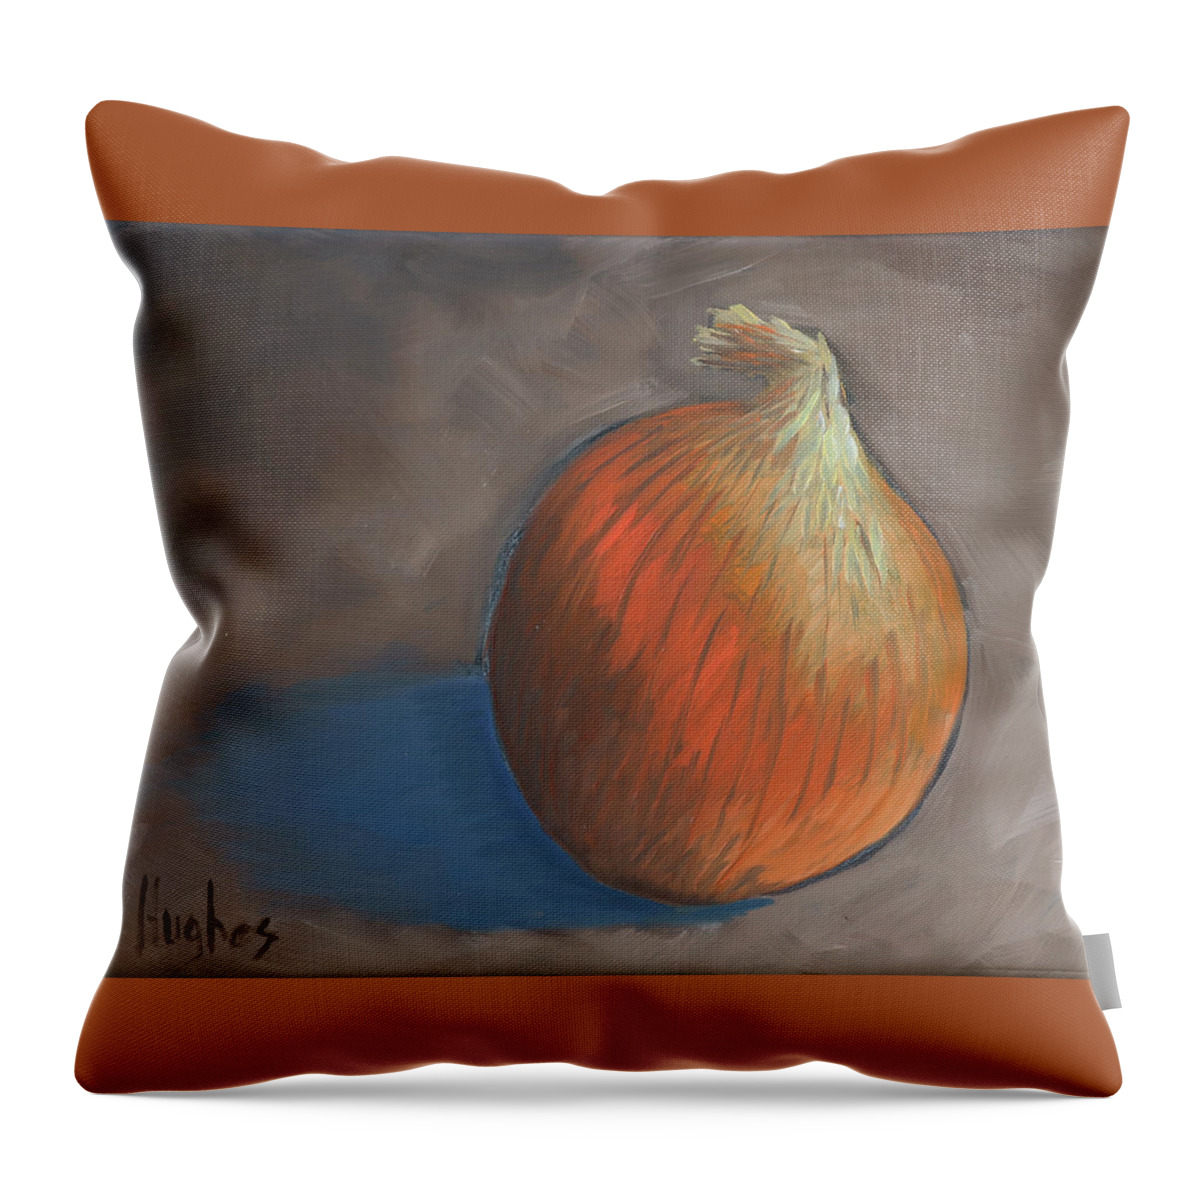 Onion Throw Pillow featuring the painting Onion by Kevin Hughes